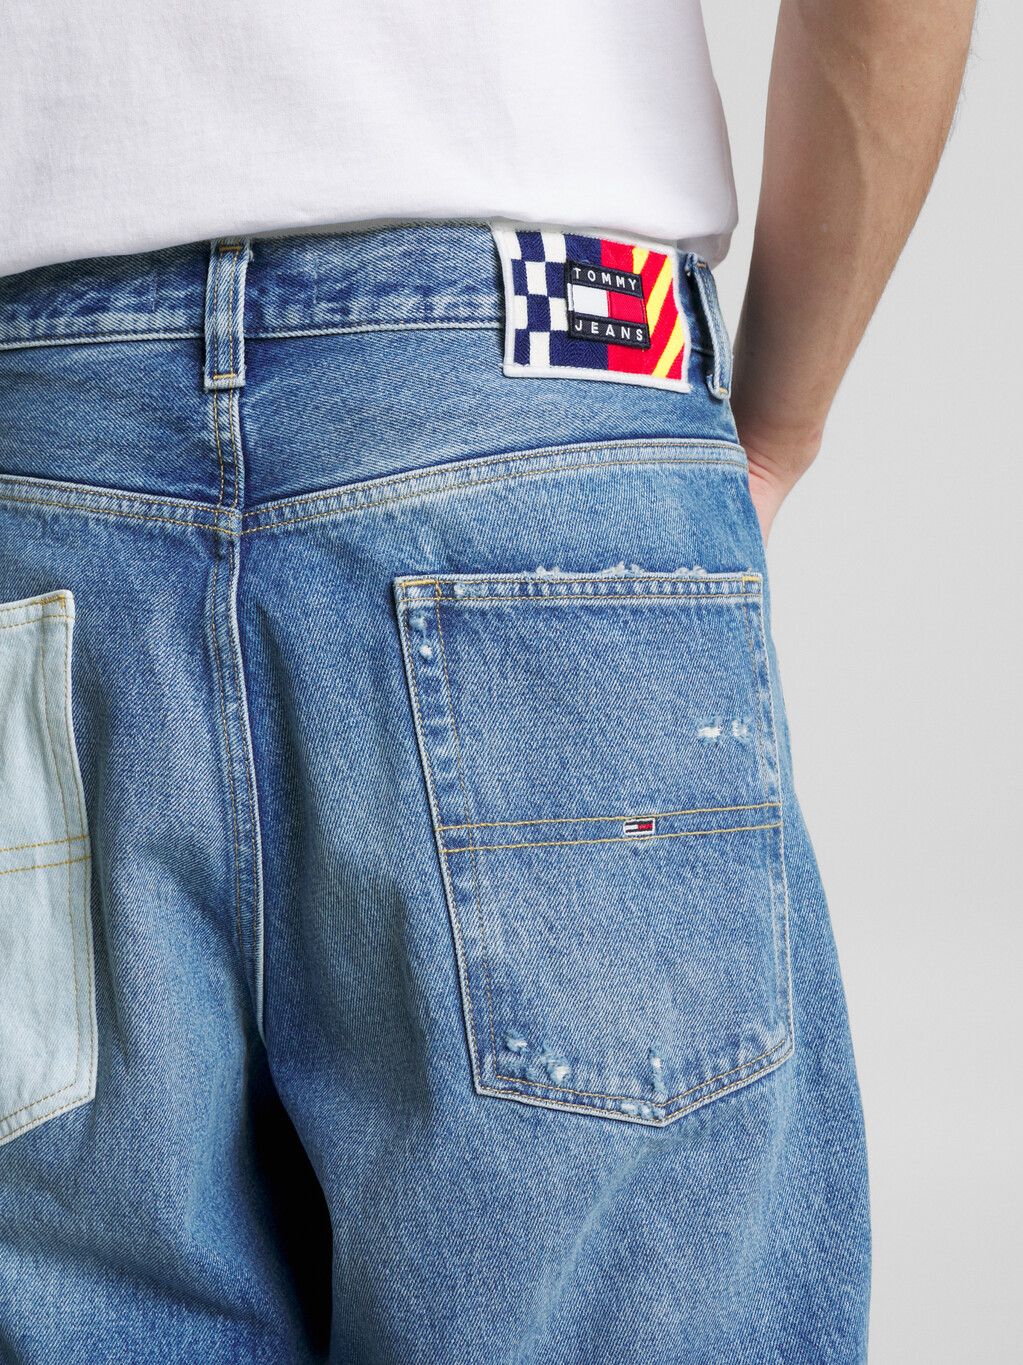 Aiden Archive Baggy Faded Jeans, Denim Light, hi-res